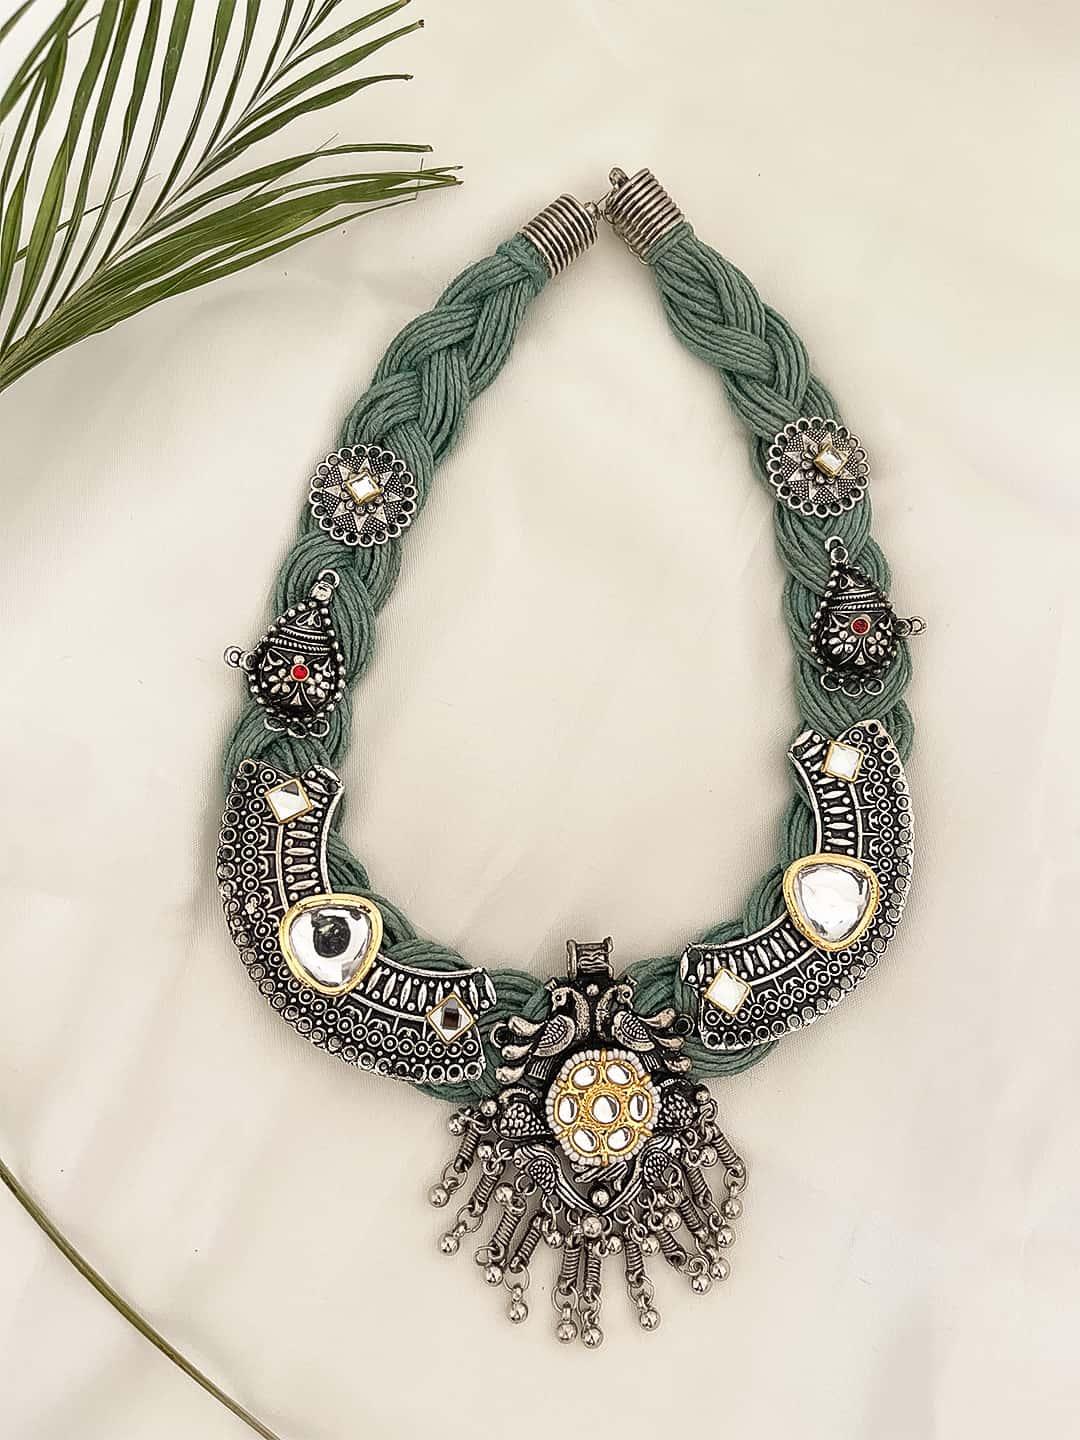 Ishhaara The Florid Knotted Jute Necklace